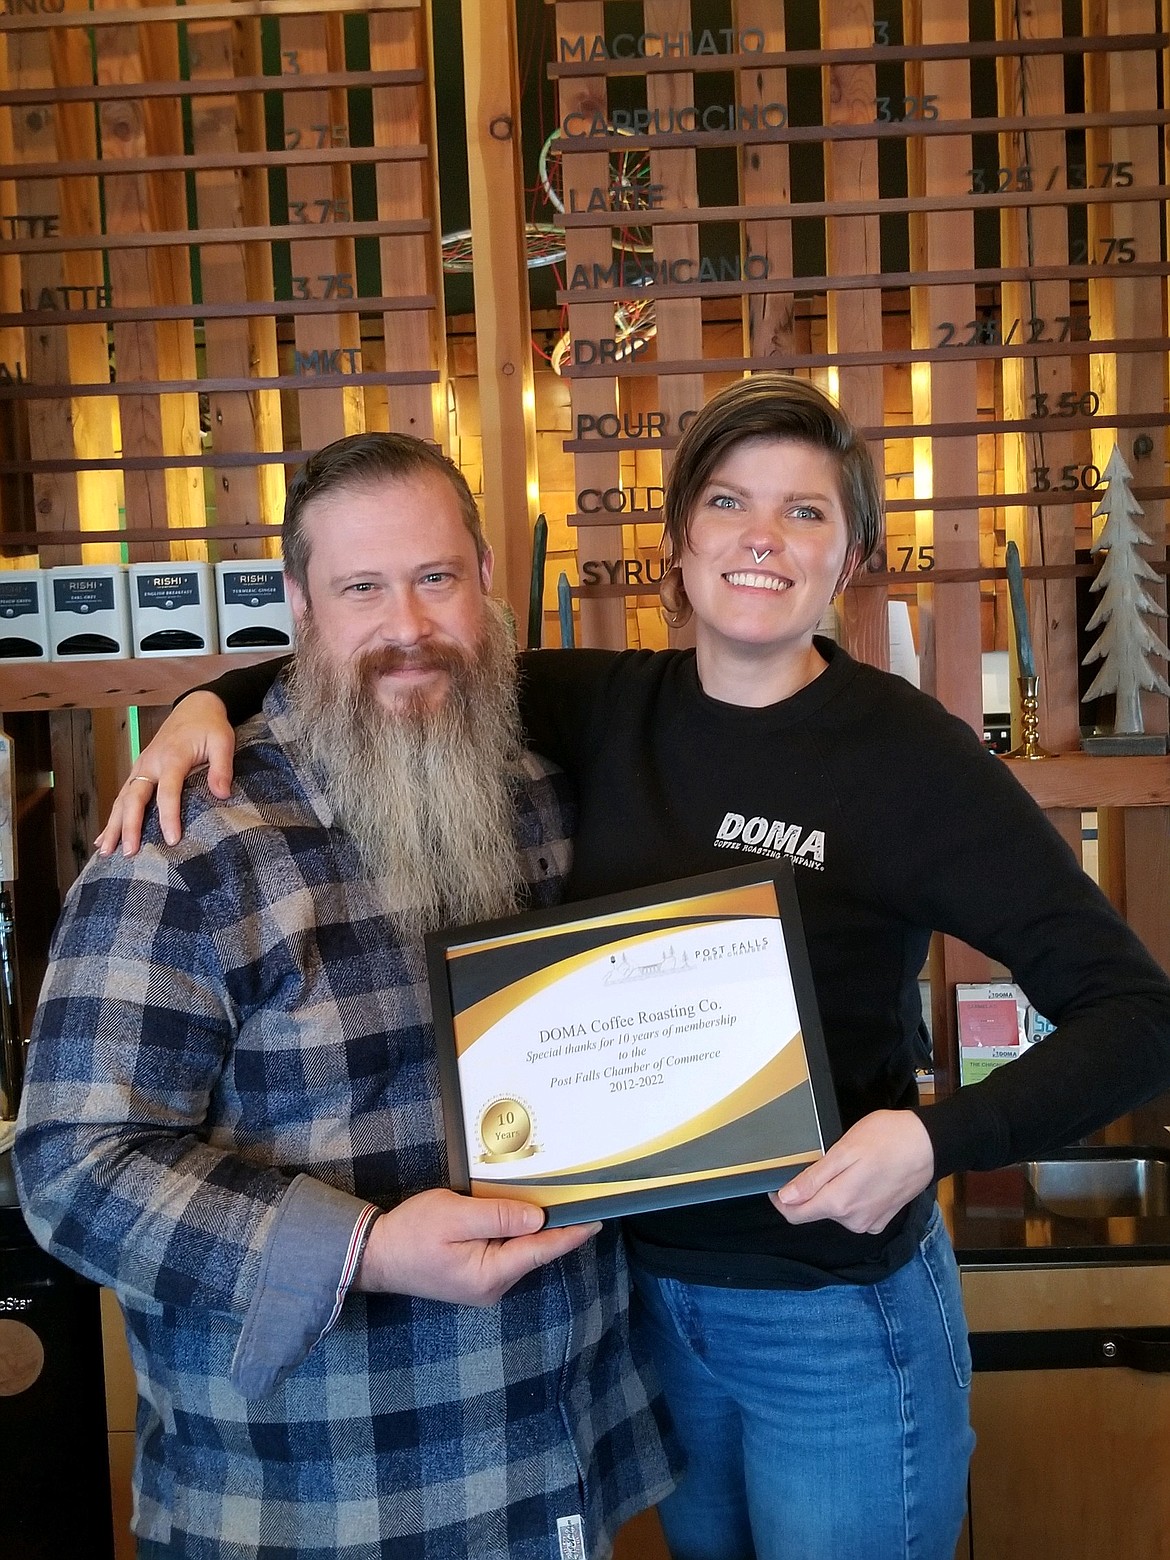 DOMA Coffee Roasting Co. recognized for being a 10-year member of the Post Falls Chamber.